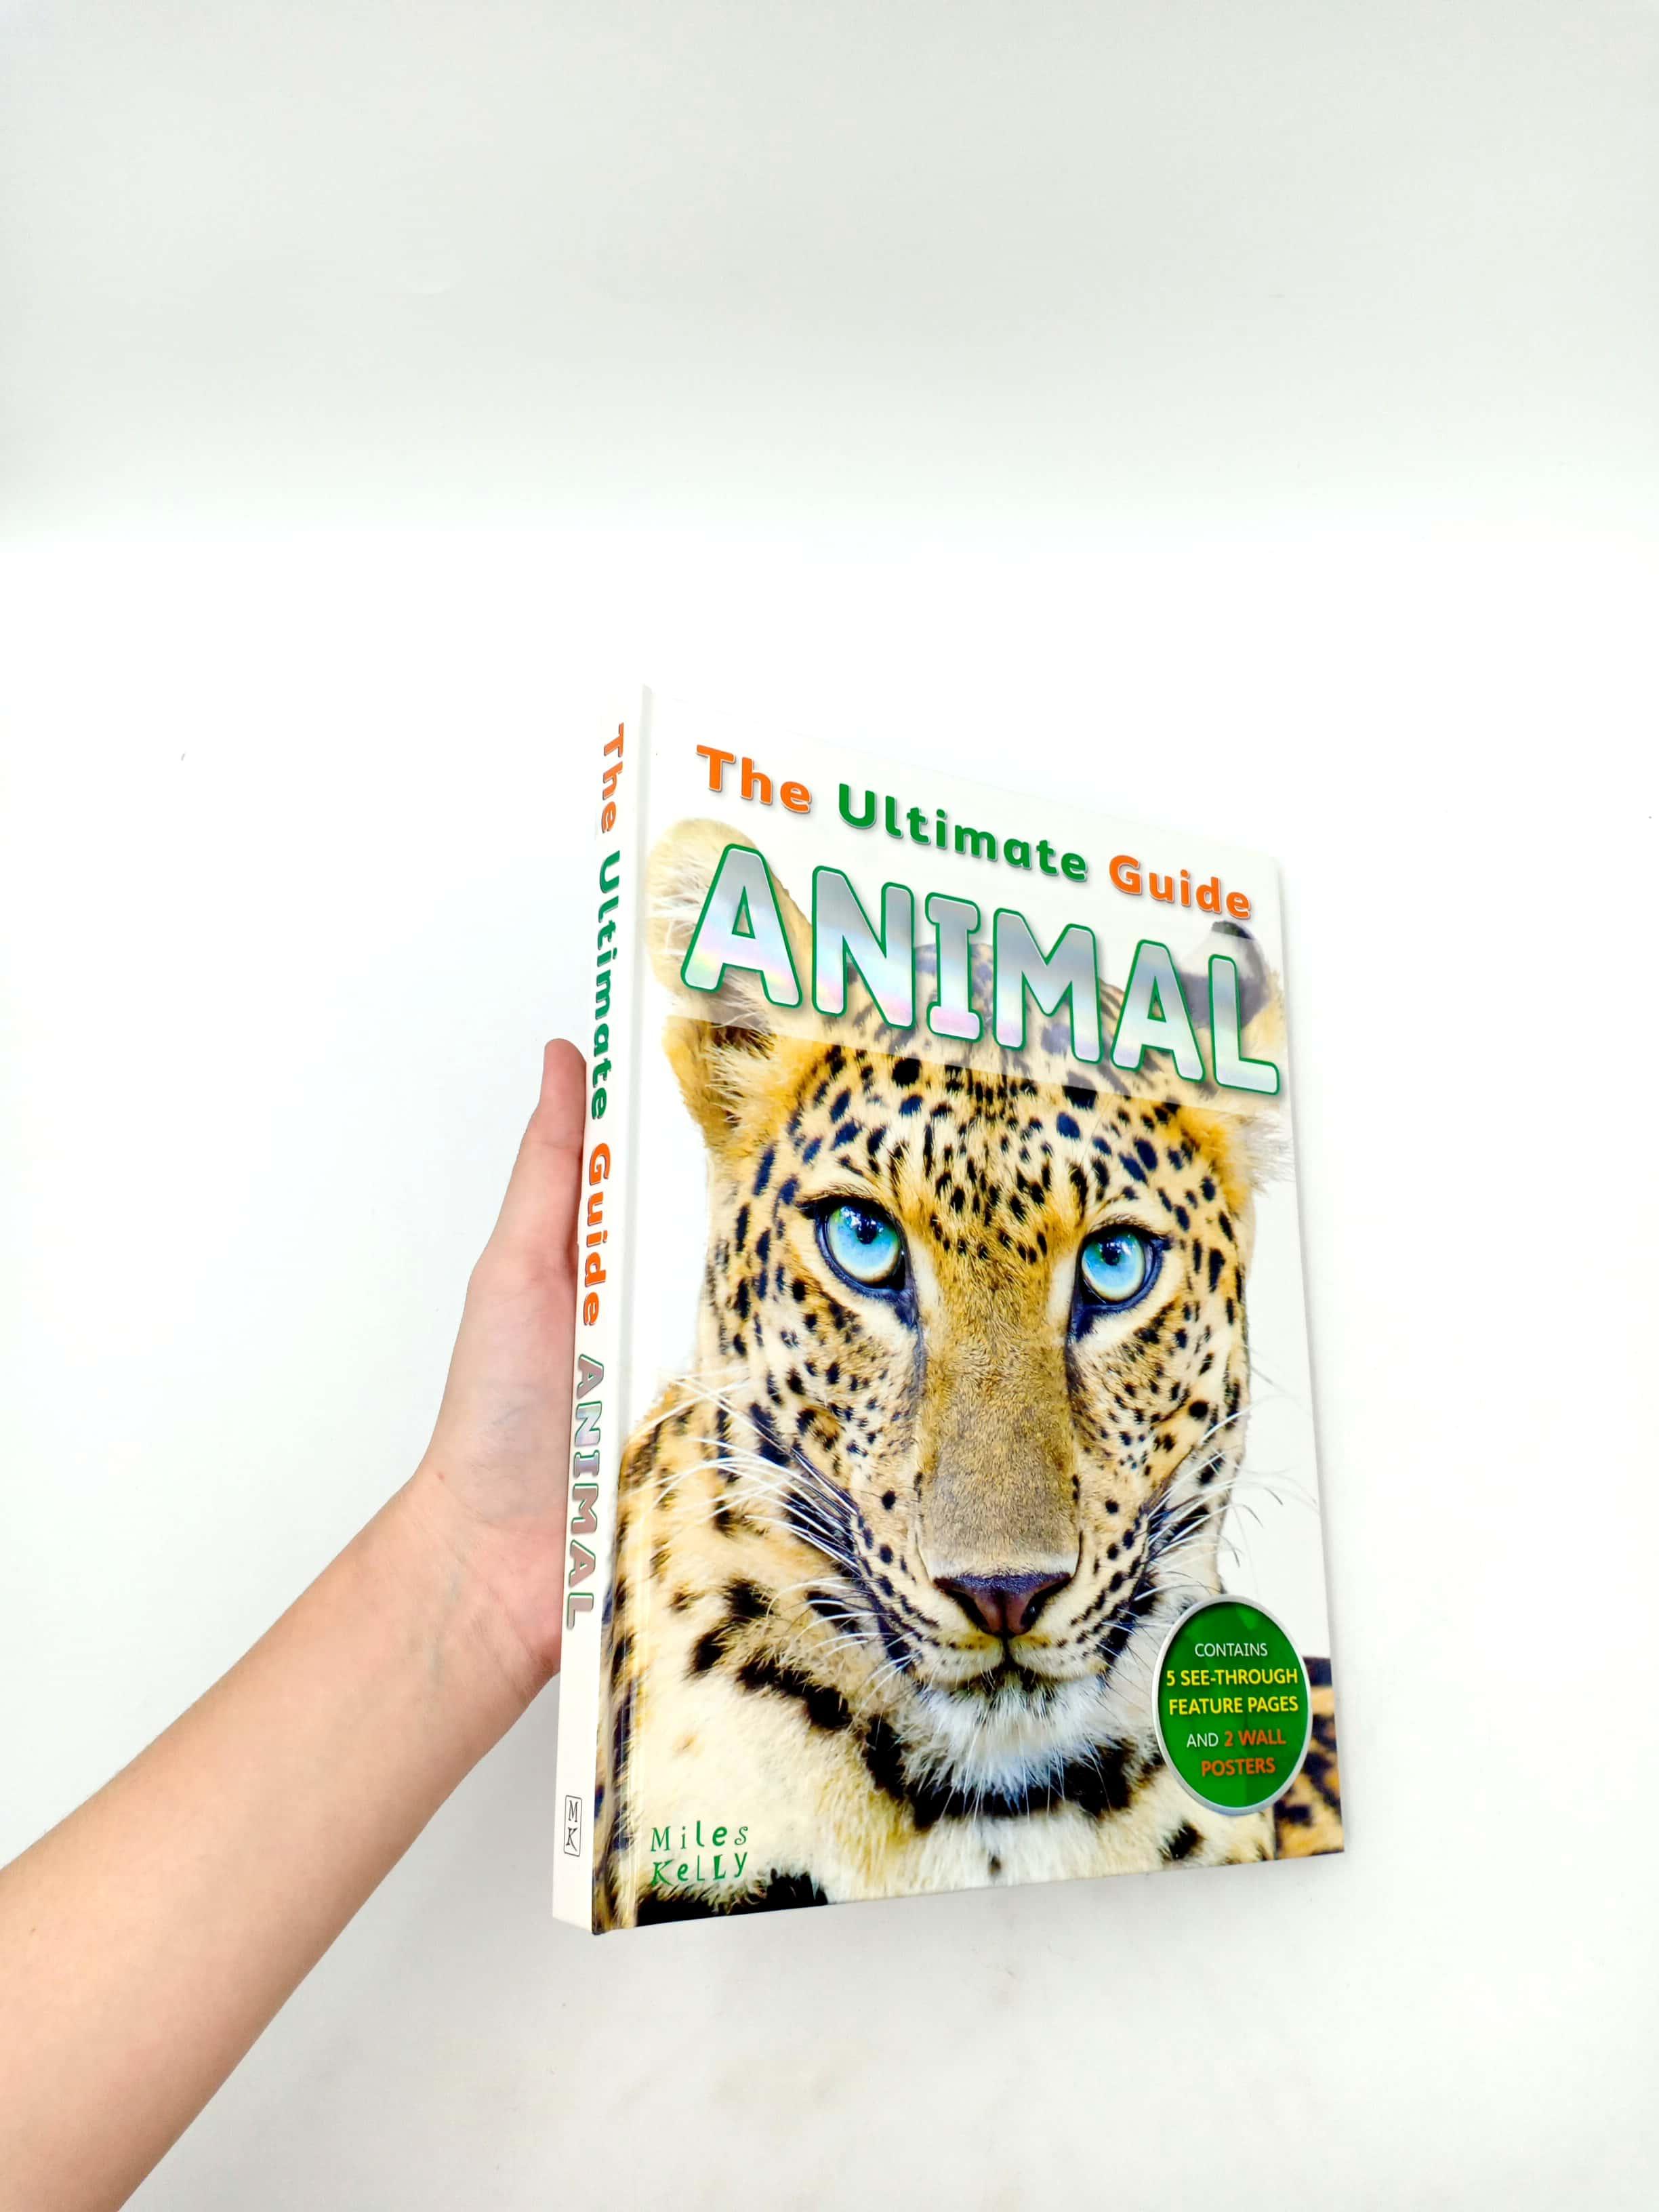 THE ULTIMATE GUIDE - ANIMAL